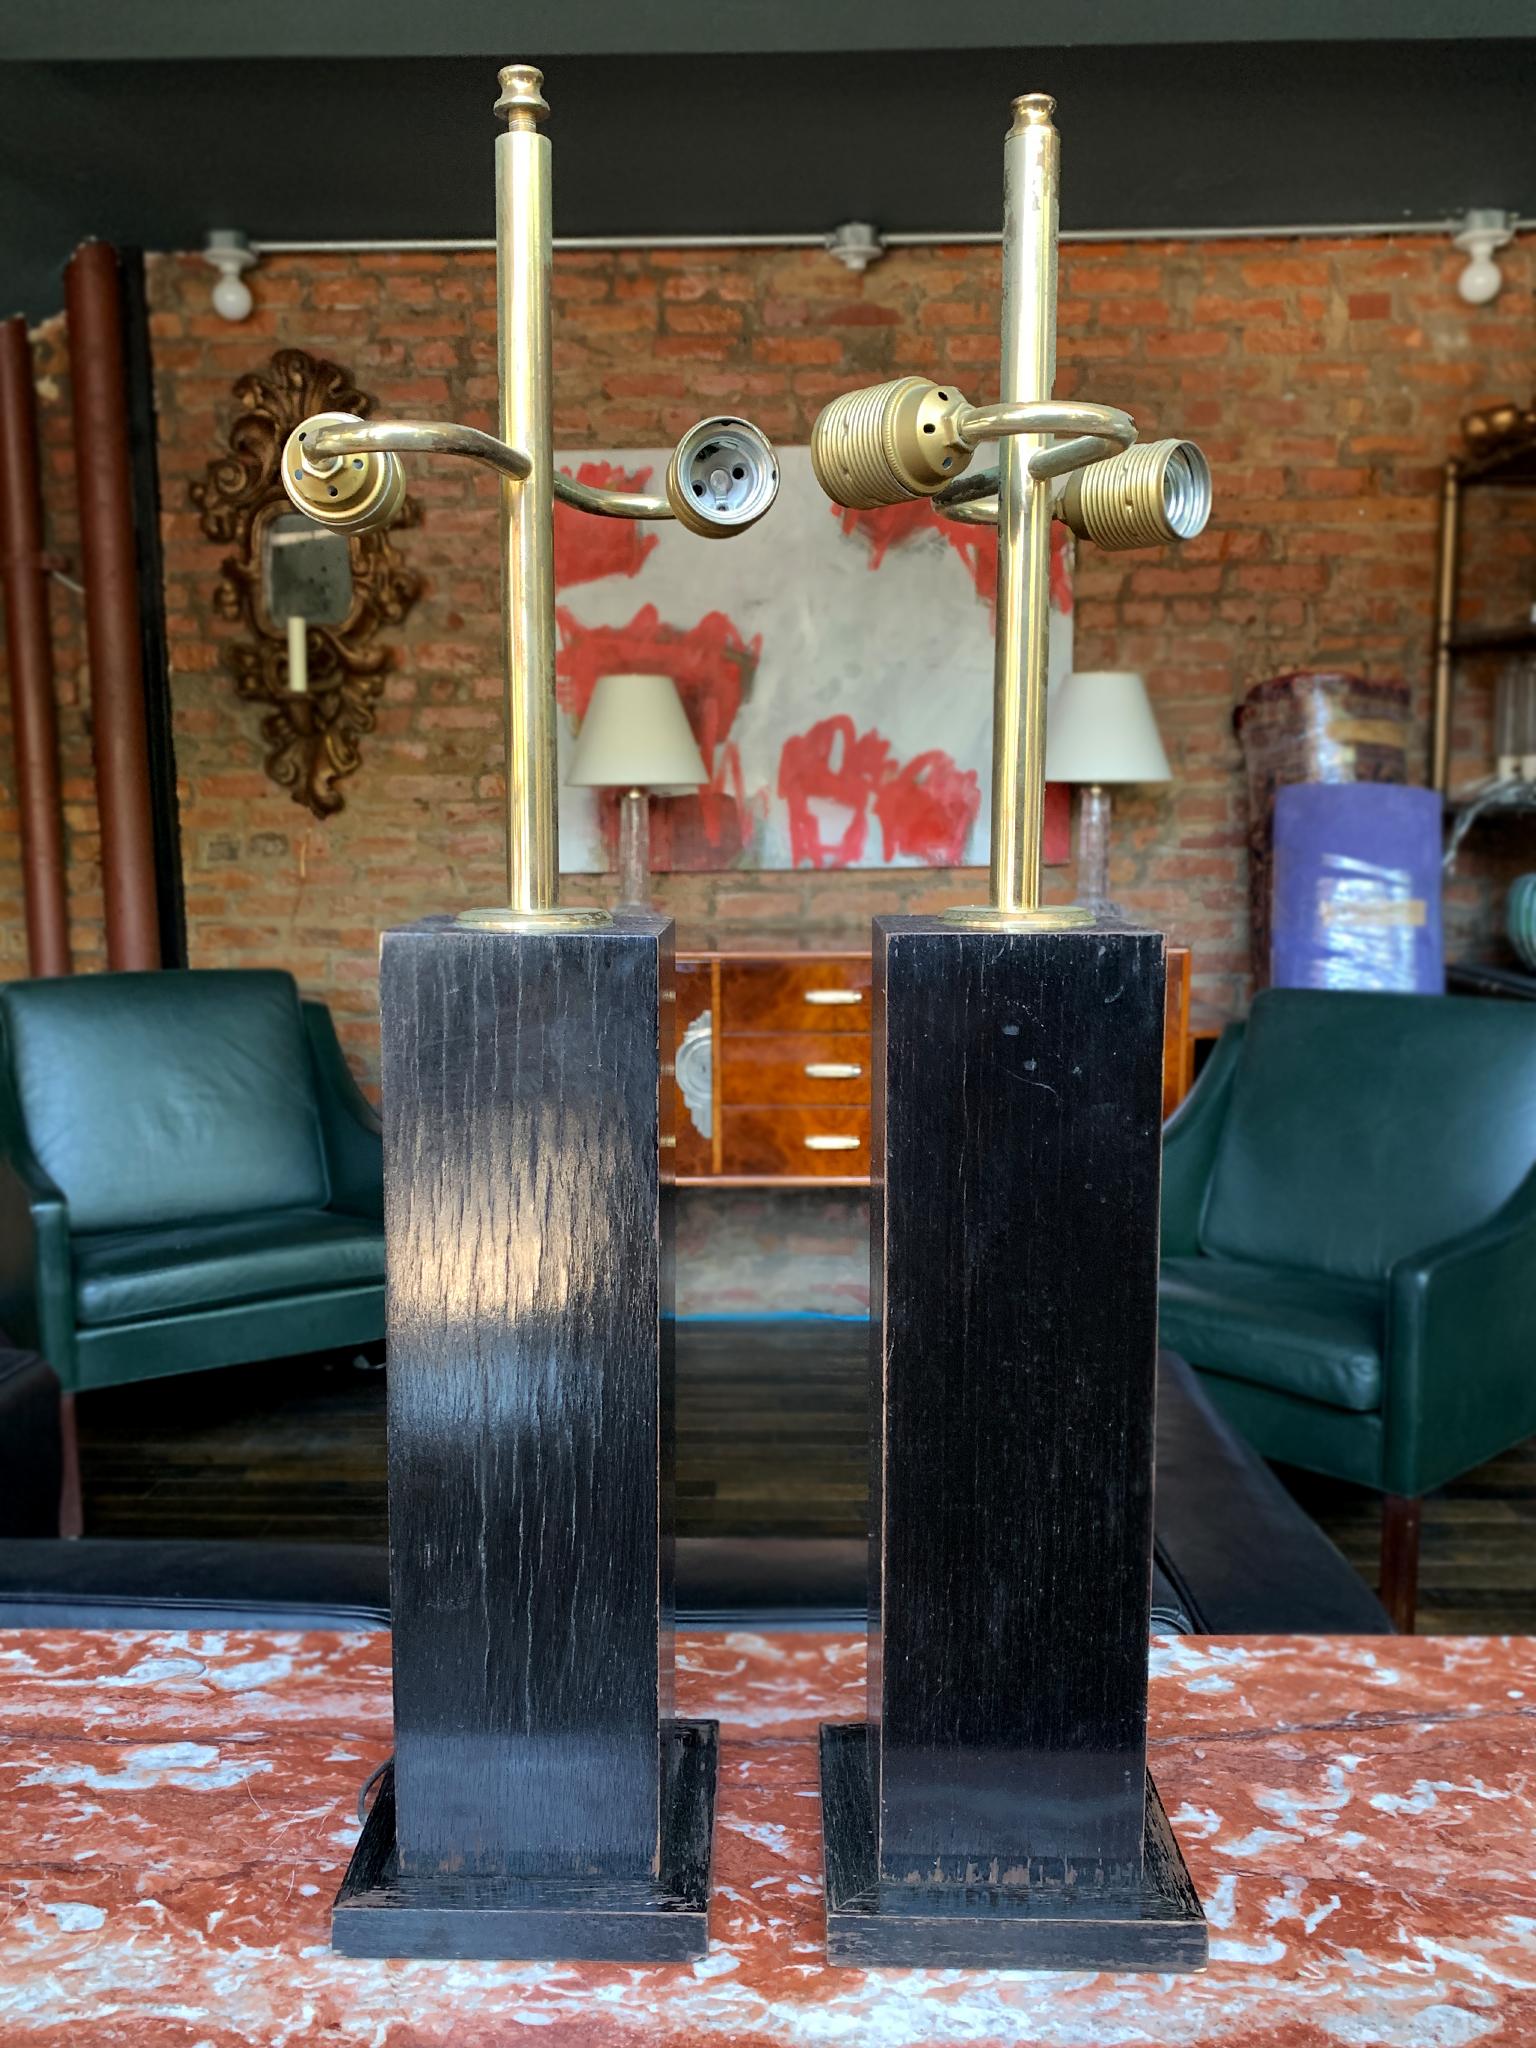 A pair of mid-20th century table lamps comprised of ebonized wood and brass hardware. Over the years the wood grain has shown through the finish, creating striations in the black lacquer. The result is a surface that's both glossy and textured. The